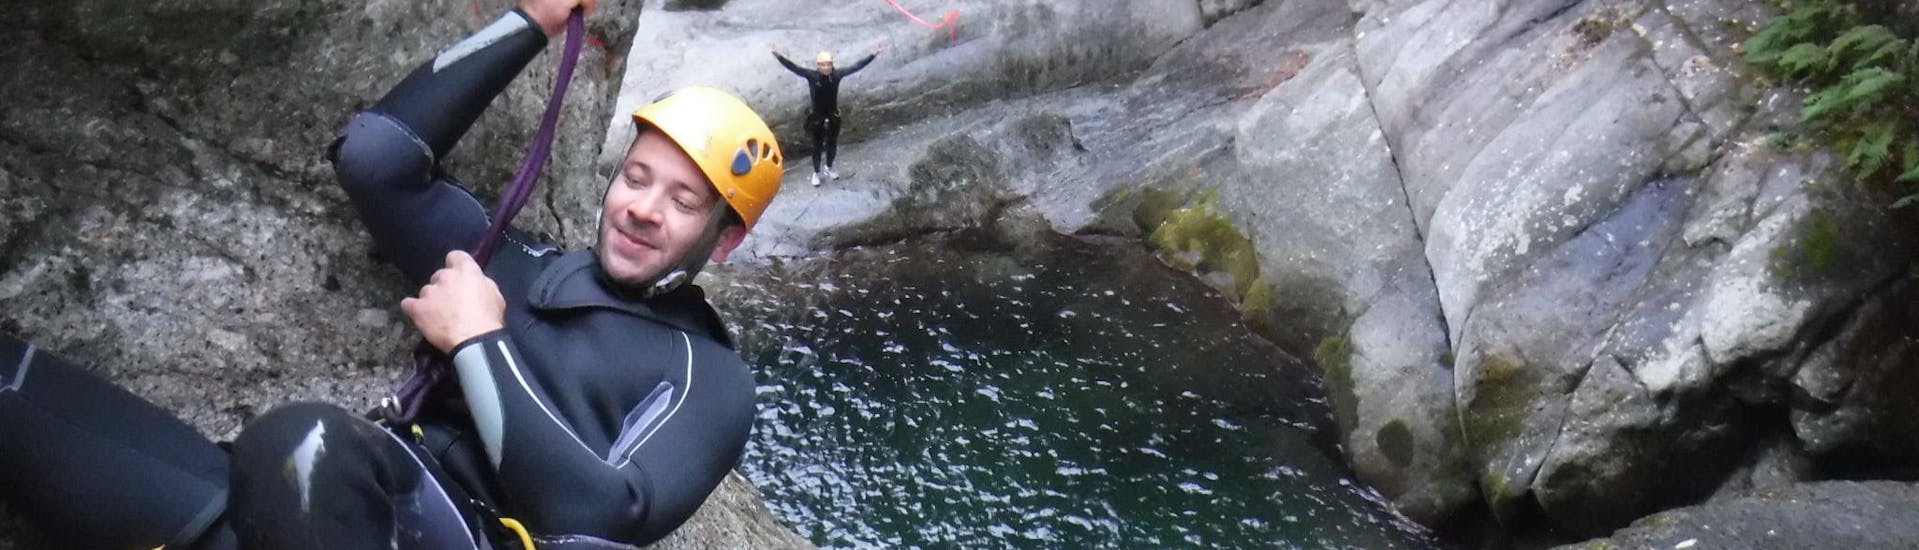 Canyoning in Canyon du Tapoul - Classic with Antipodes Aveyron - Hero image